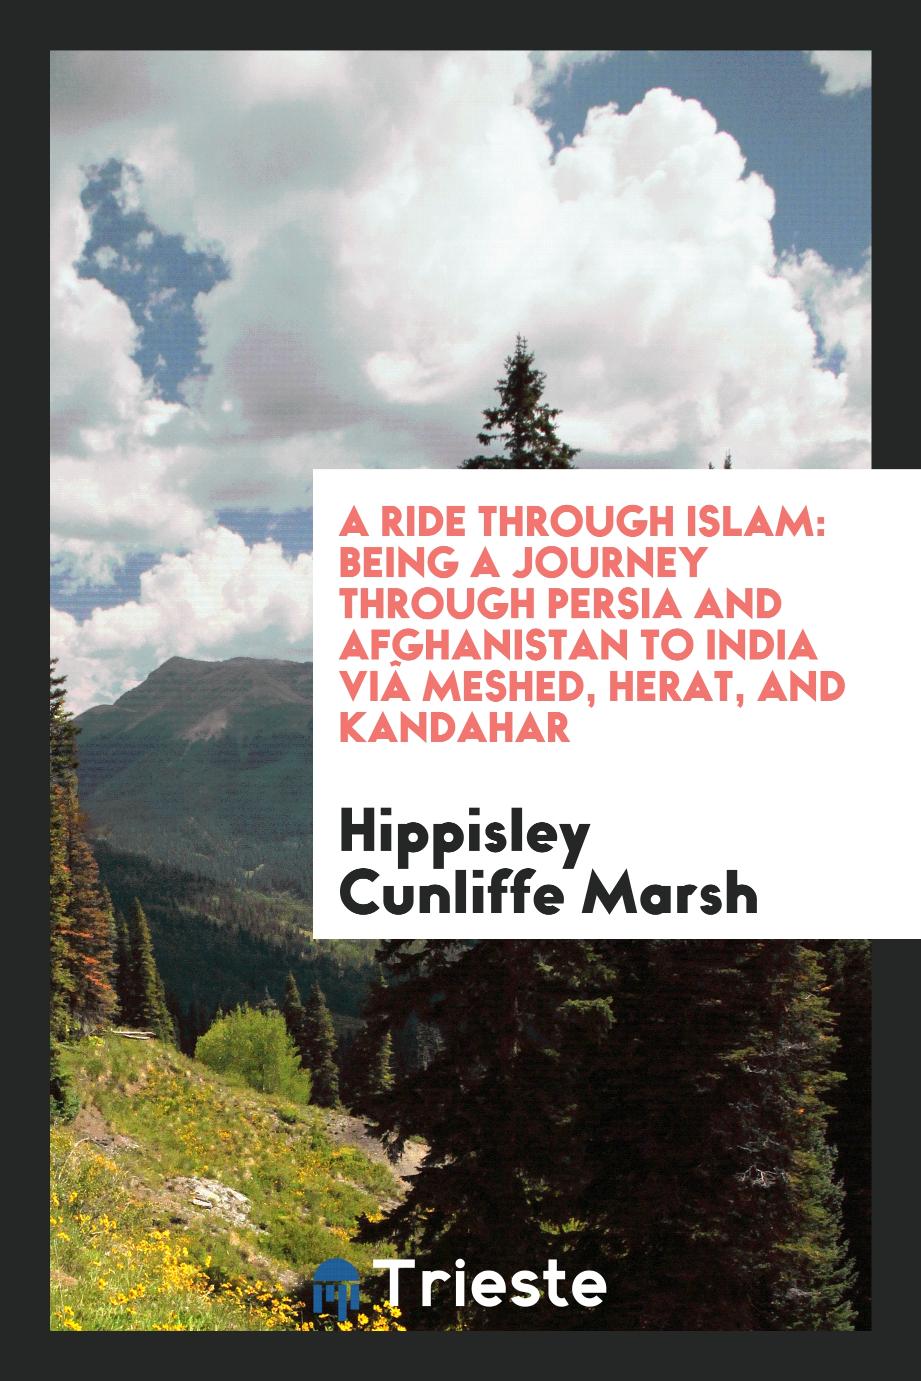 A ride through Islam: being a journey through Persia and Afghanistan to India viâ Meshed, Herat, and Kandahar